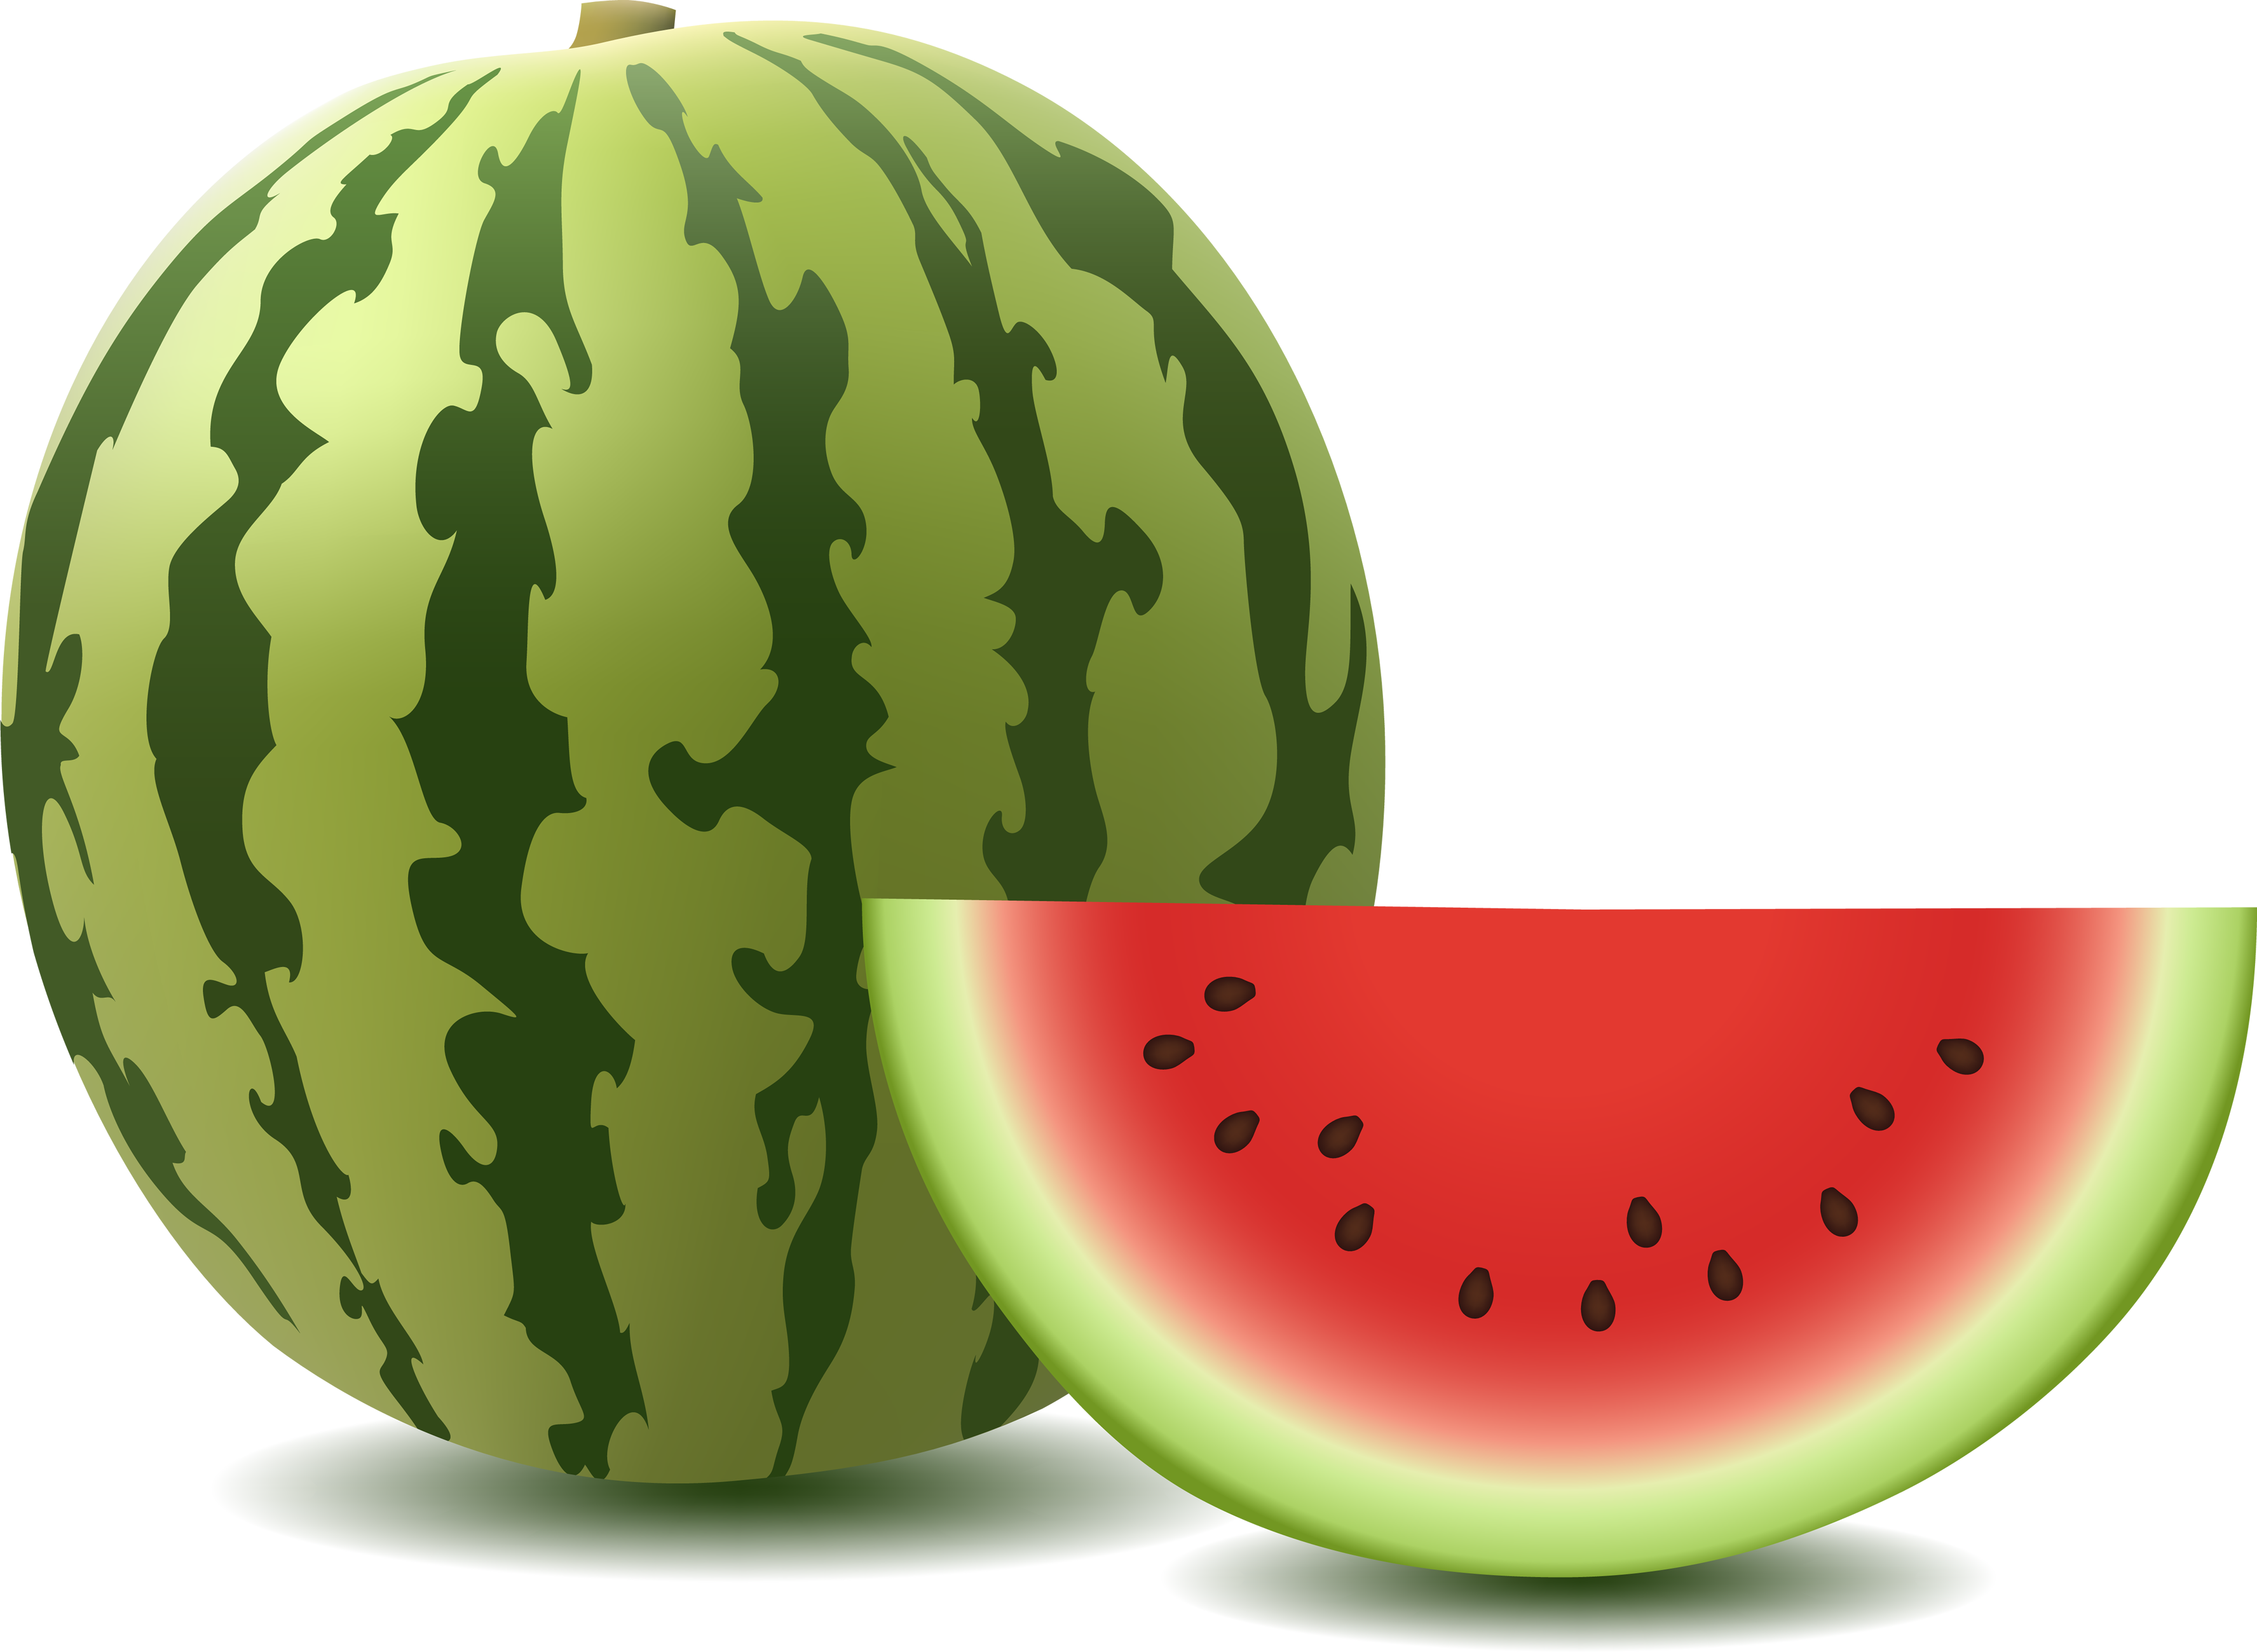 Png images free download. Leaf clipart watermelon